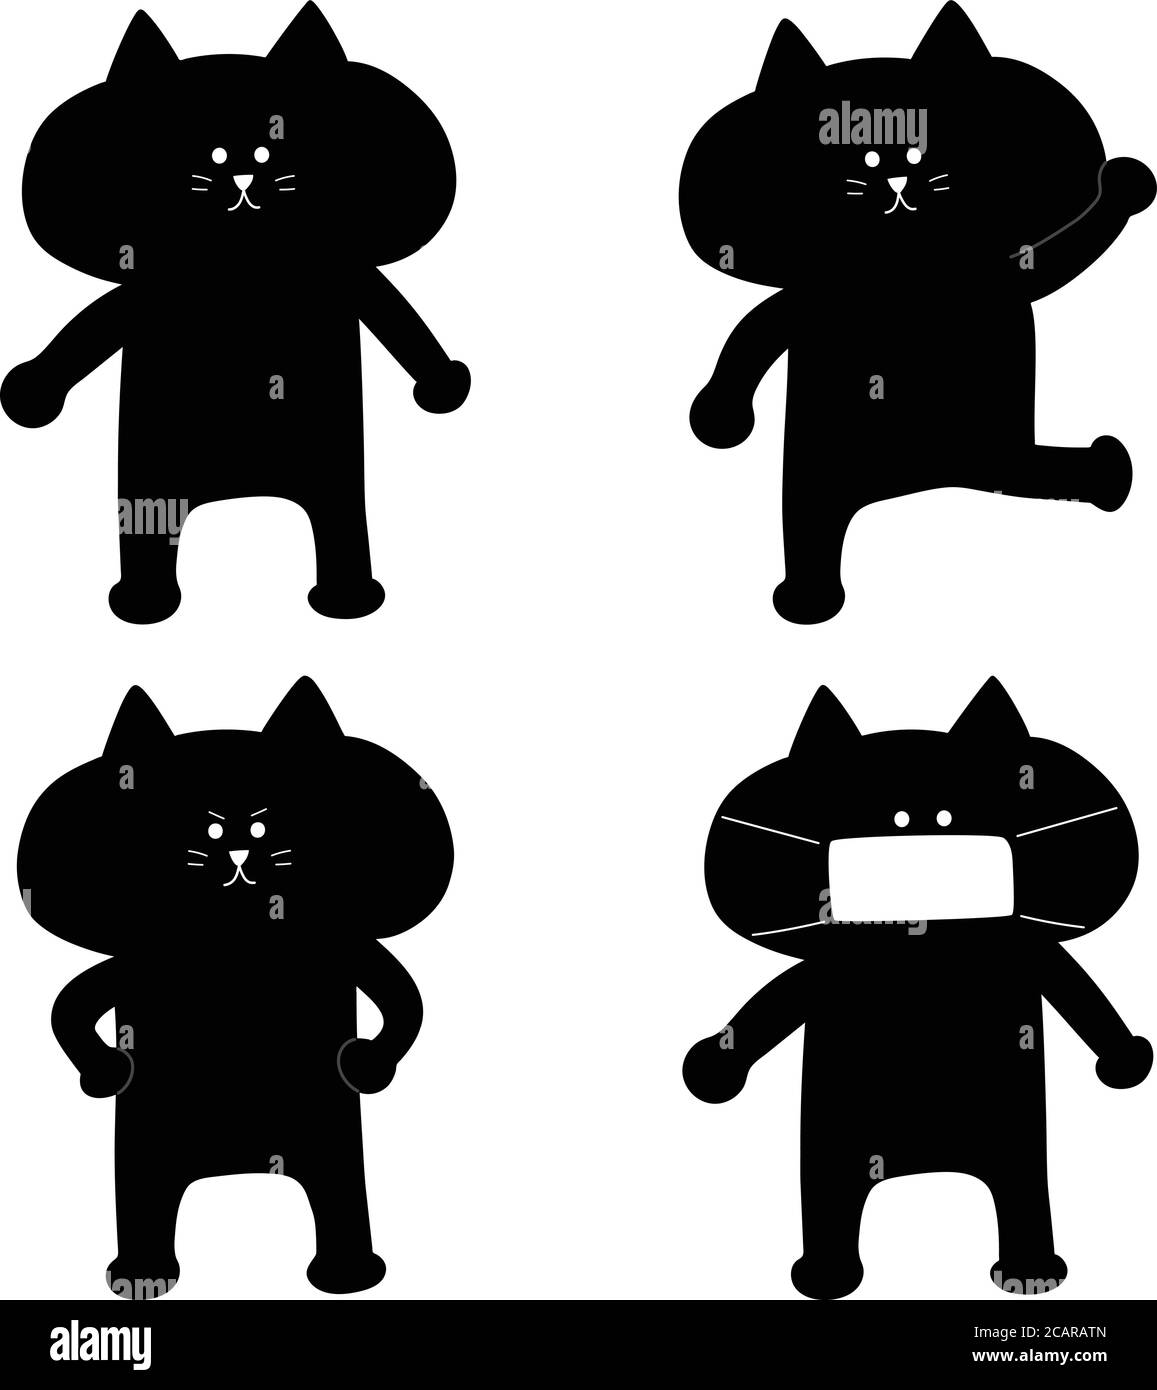 Black silhouette of cartoon cats. Vector illustration isolated on white background. Stock Vector